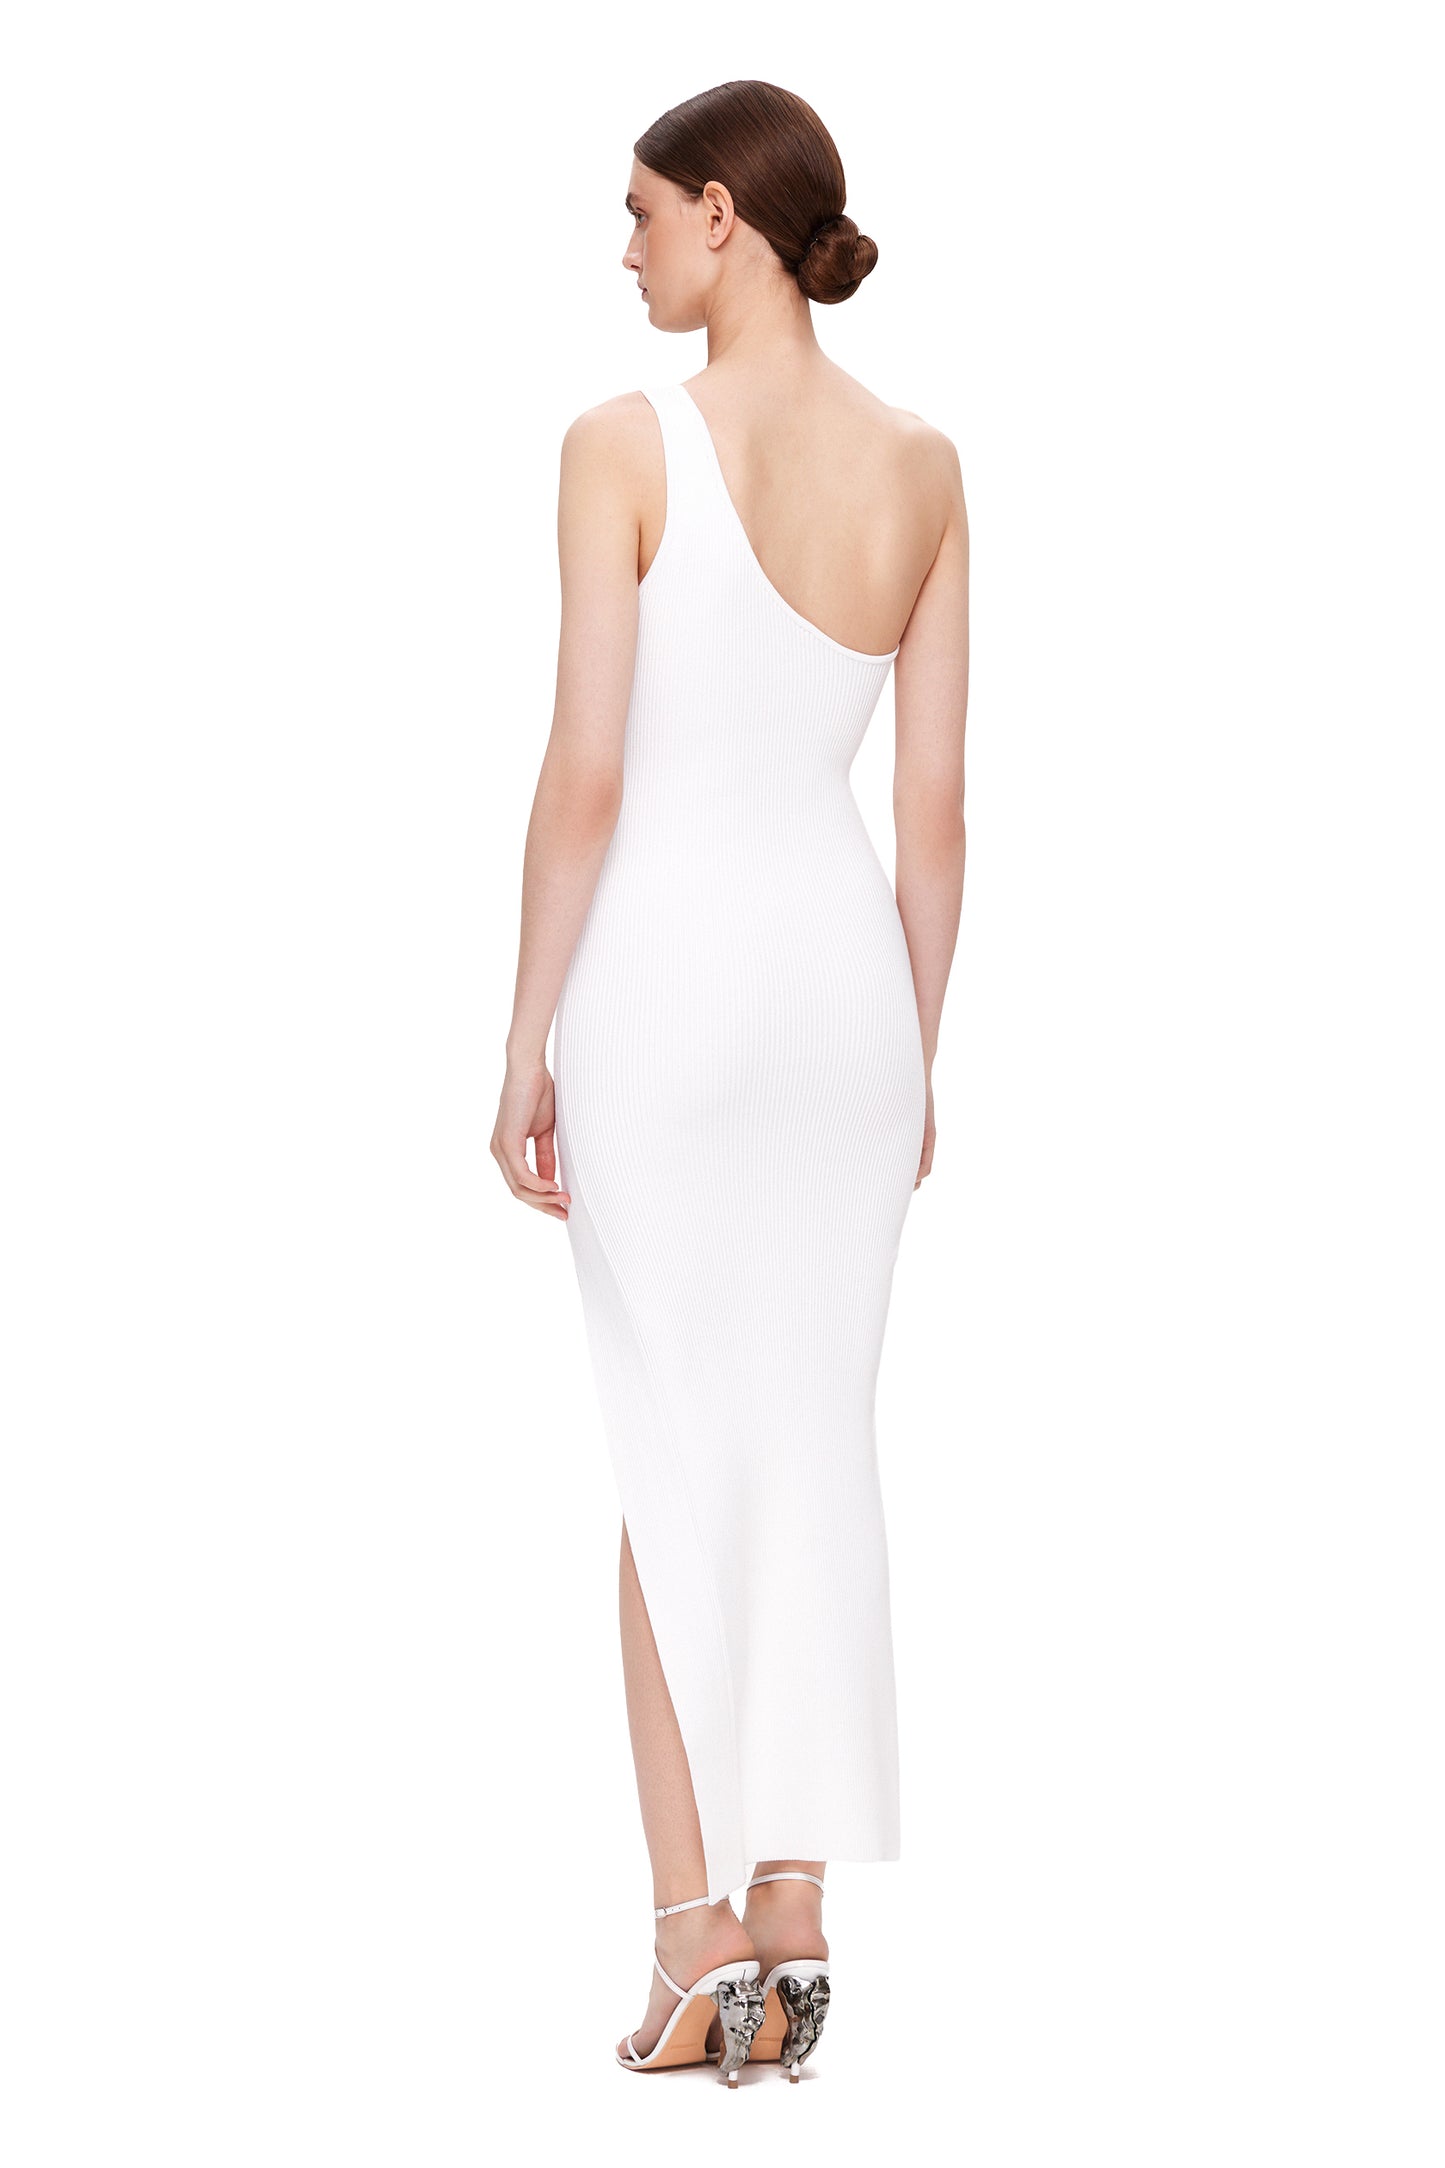 KNIT ASYMMETRICAL COUTURE DRESS WITH V-NECKLINE AND OPEN LEG